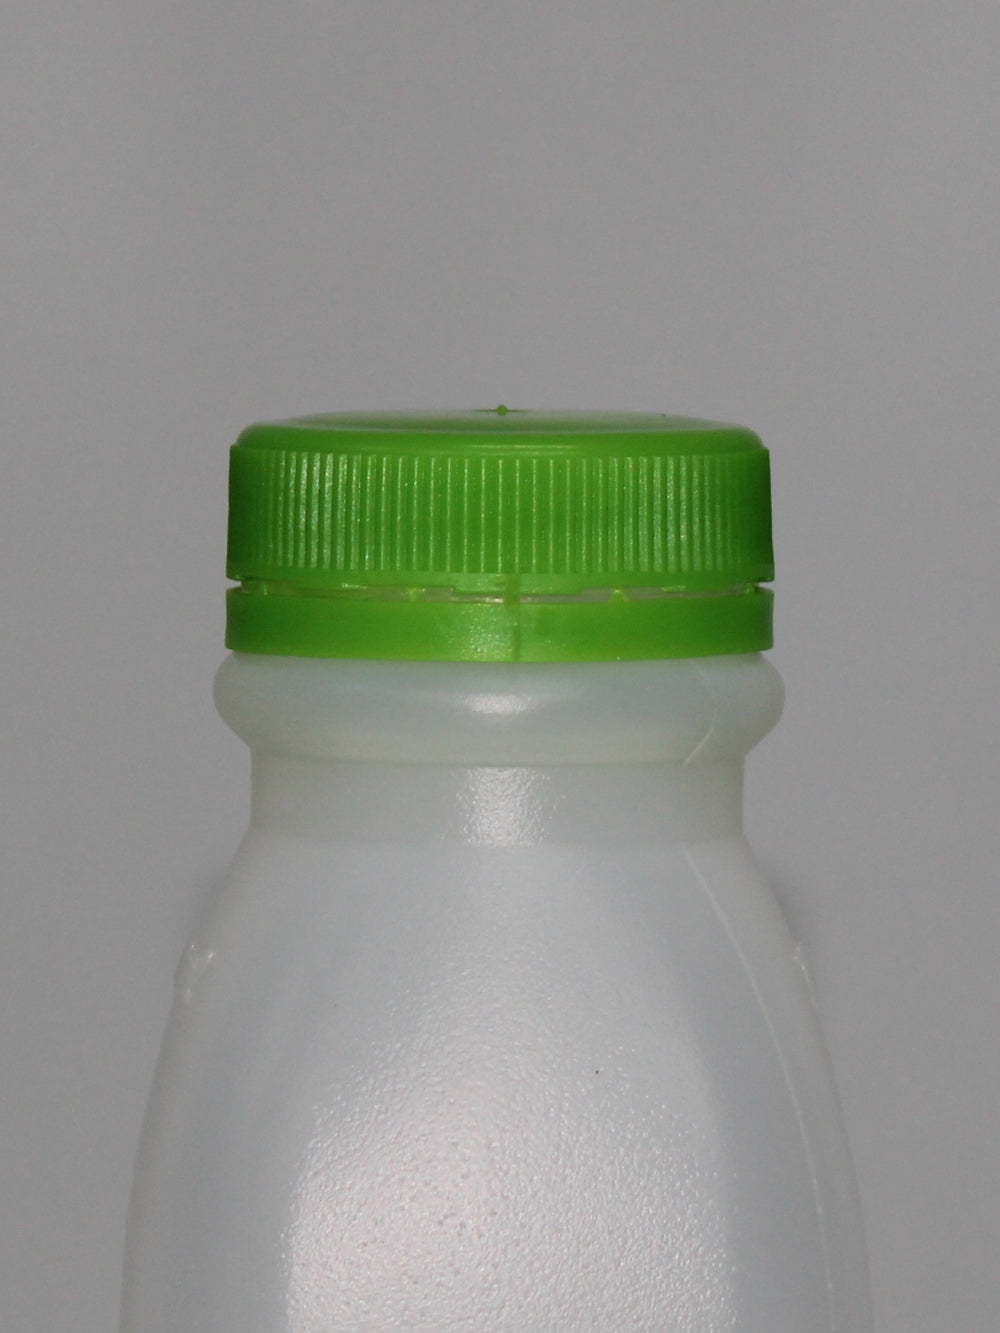 2Lt Dairy/Milk Square HDPE Bottle with Handle - (Box of 56 units) - Packnet SA